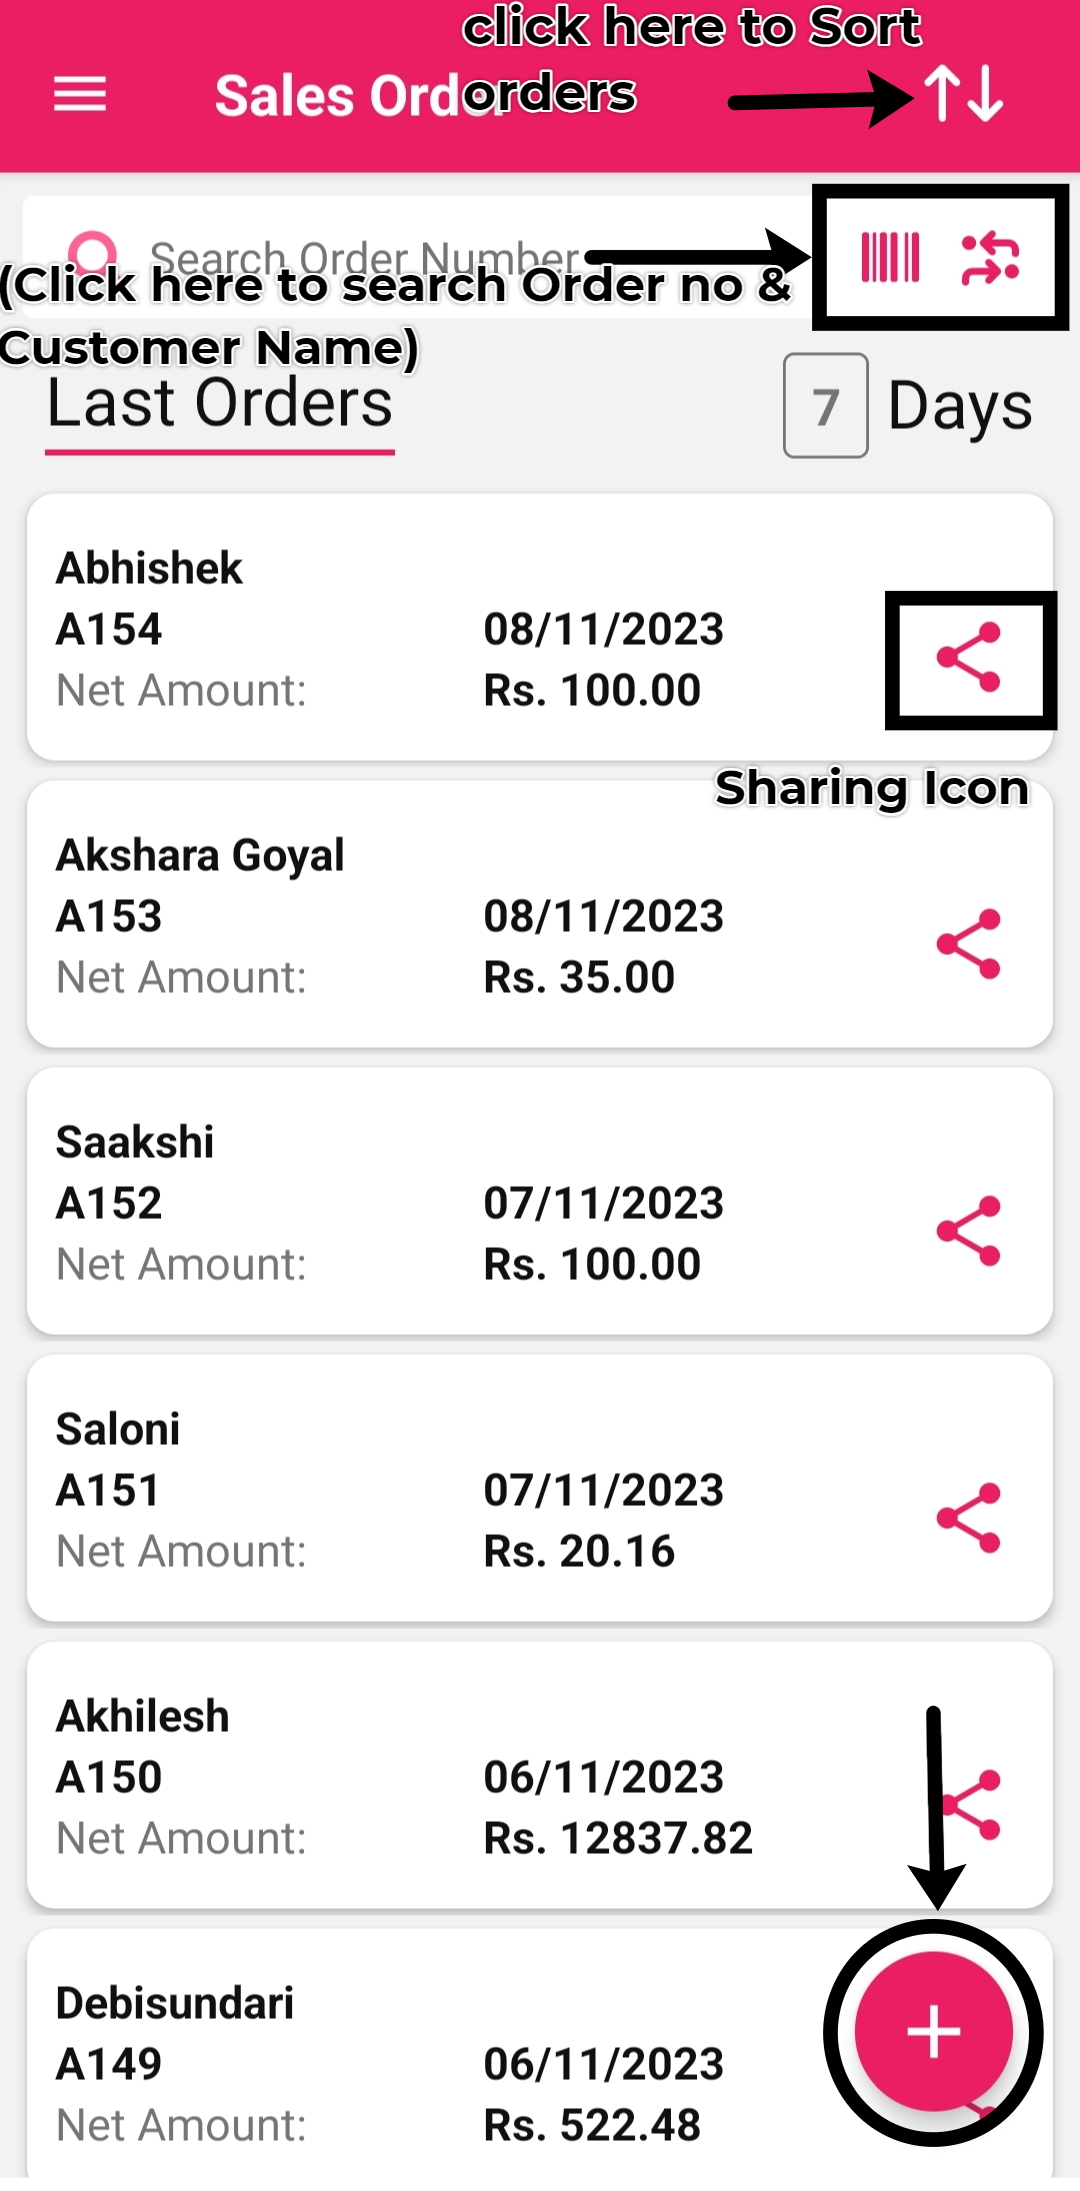 Sales Order list view in SWILPOS app with search and sort functionality, alongside options for sharing and adding new orders.